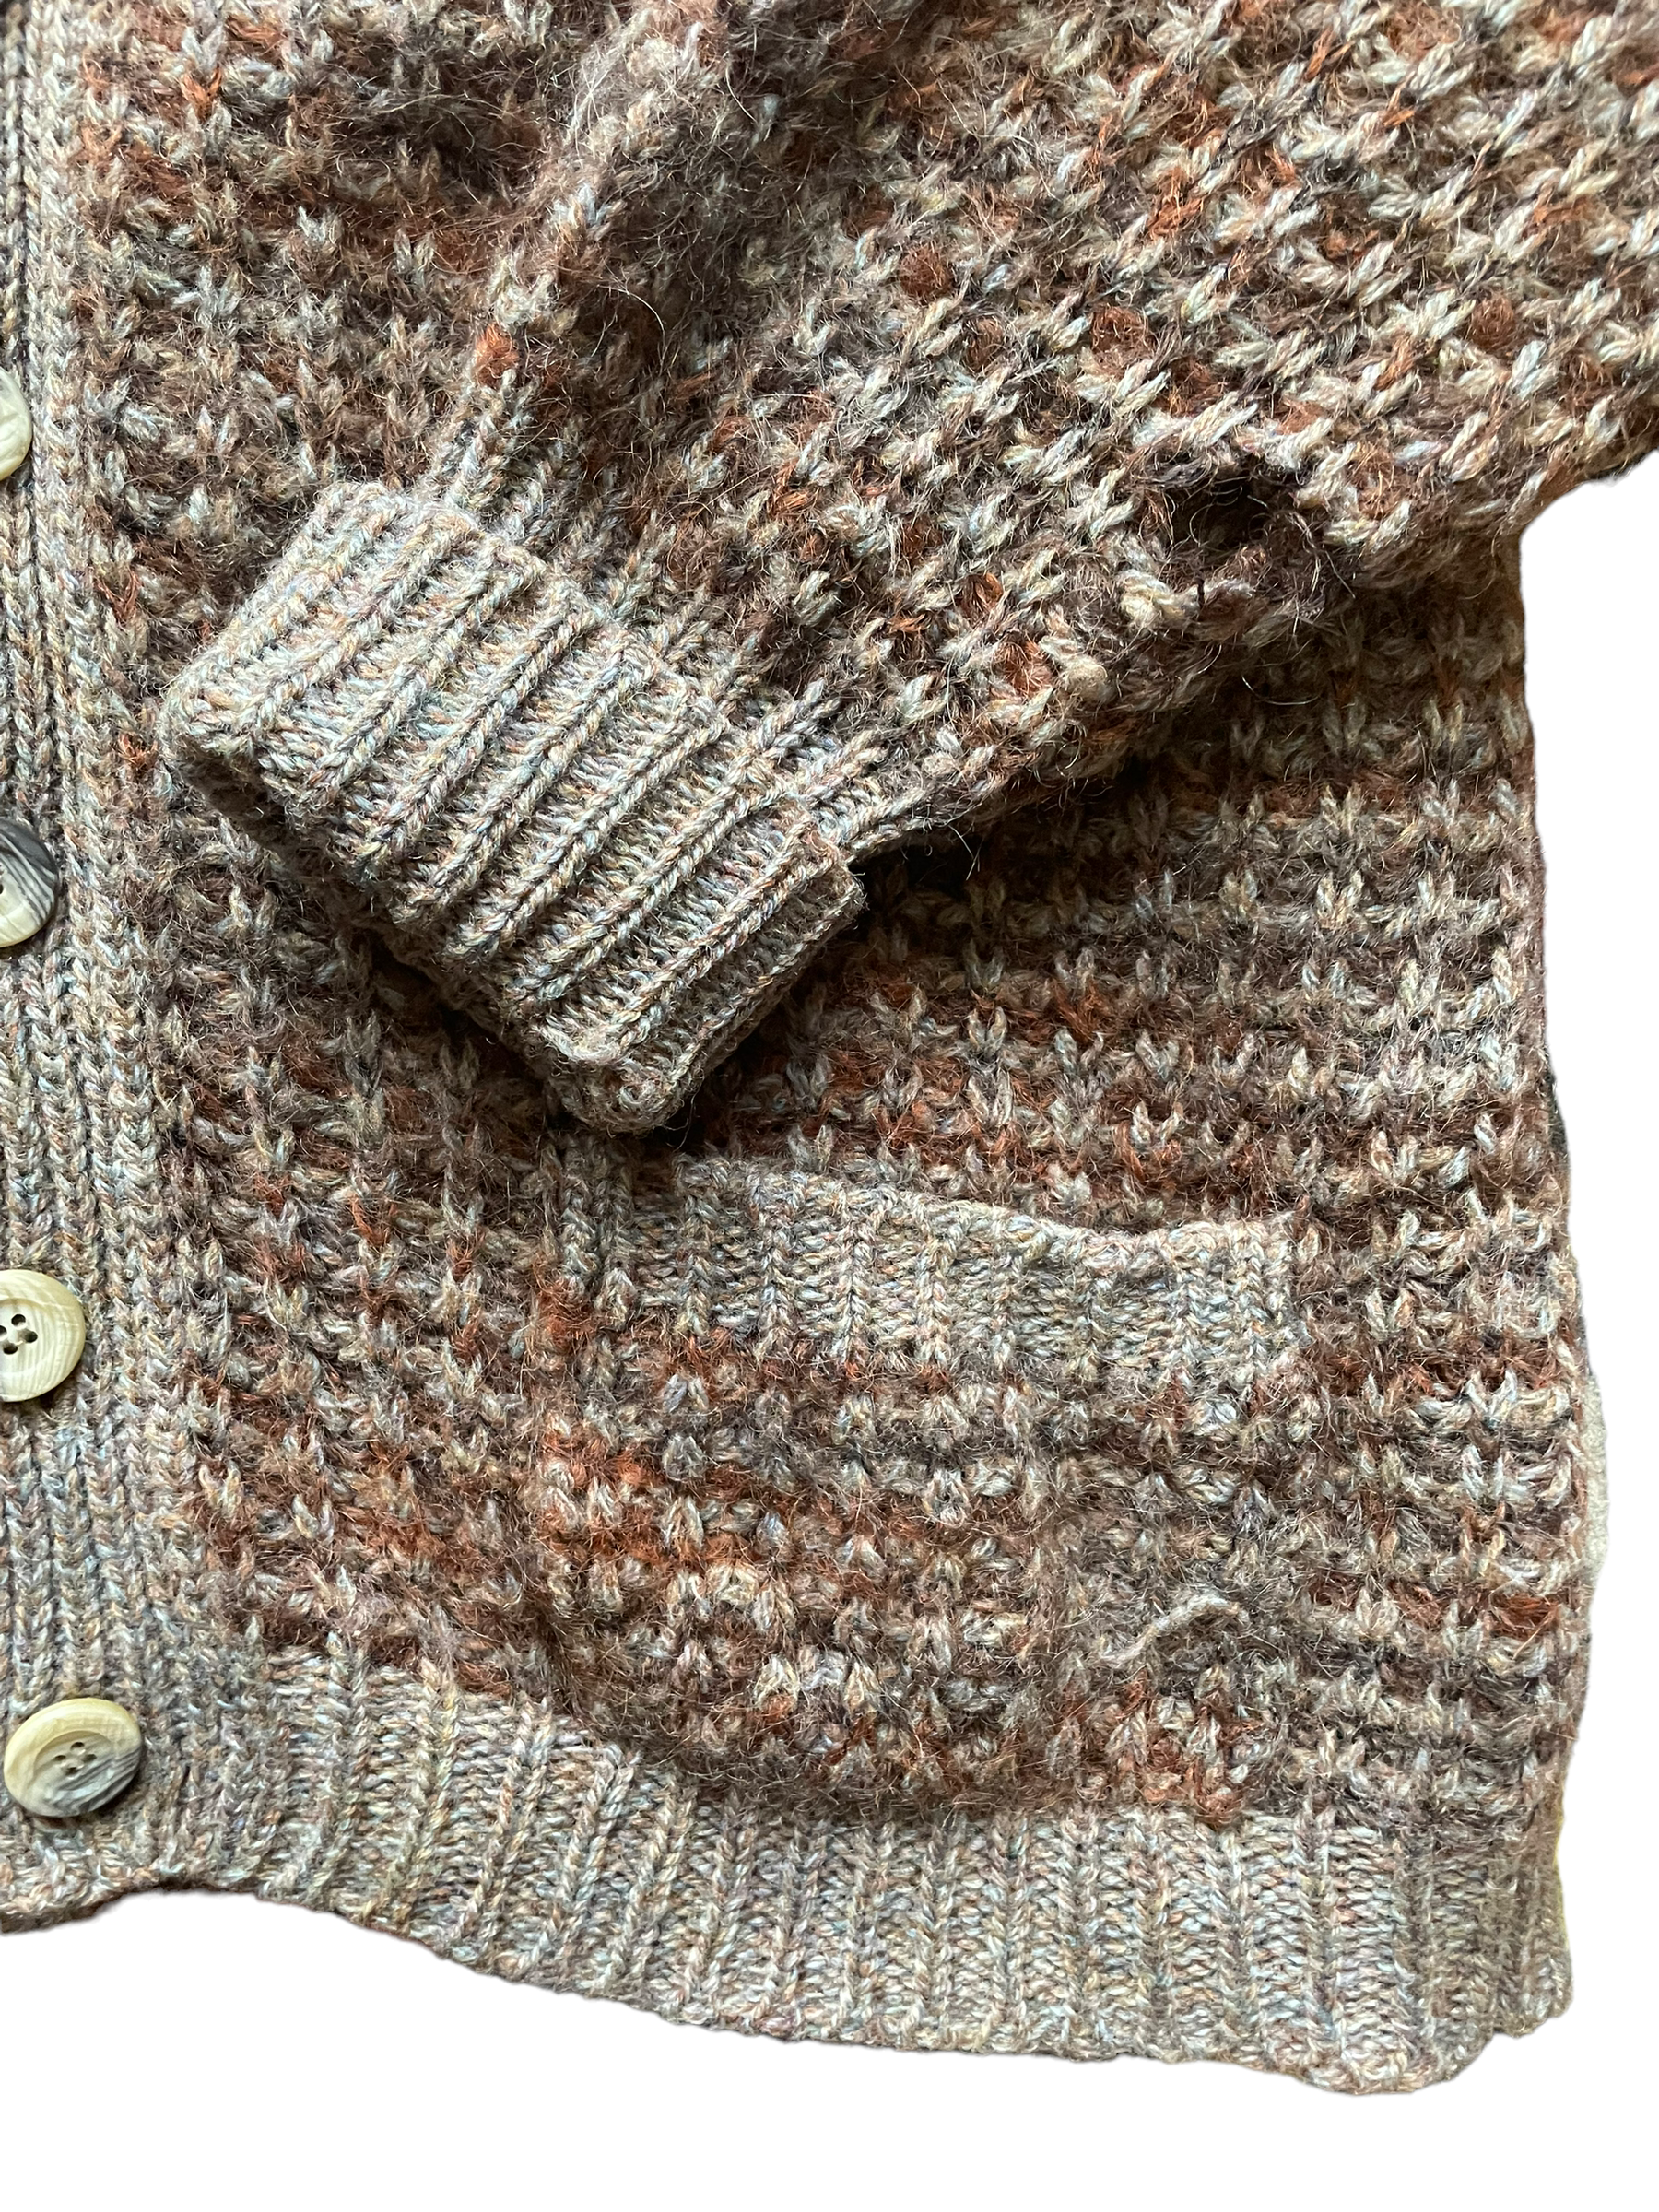 Vintage 1960s Shetland Wool Grampa Cardigan |  Barn Owl Vintage | Seattle Vintage Sweaters Close up view of left side pocket and sleeve. Hole visible on left sleeve.